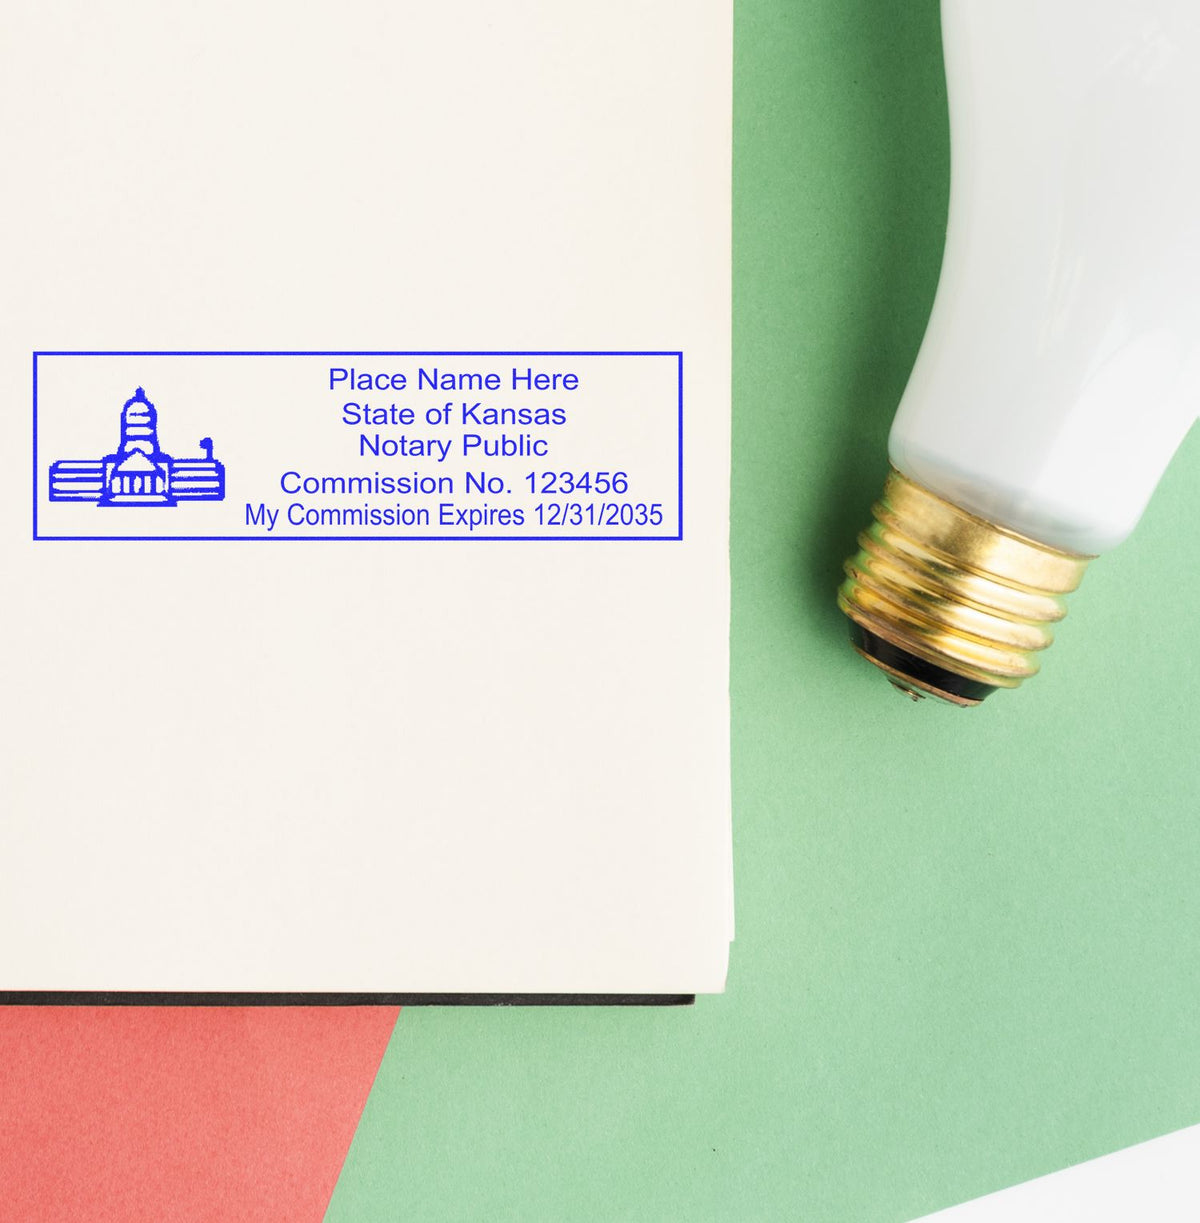 The MaxLight Premium Pre-Inked Kansas State Seal Notarial Stamp stamp impression comes to life with a crisp, detailed photo on paper - showcasing true professional quality.